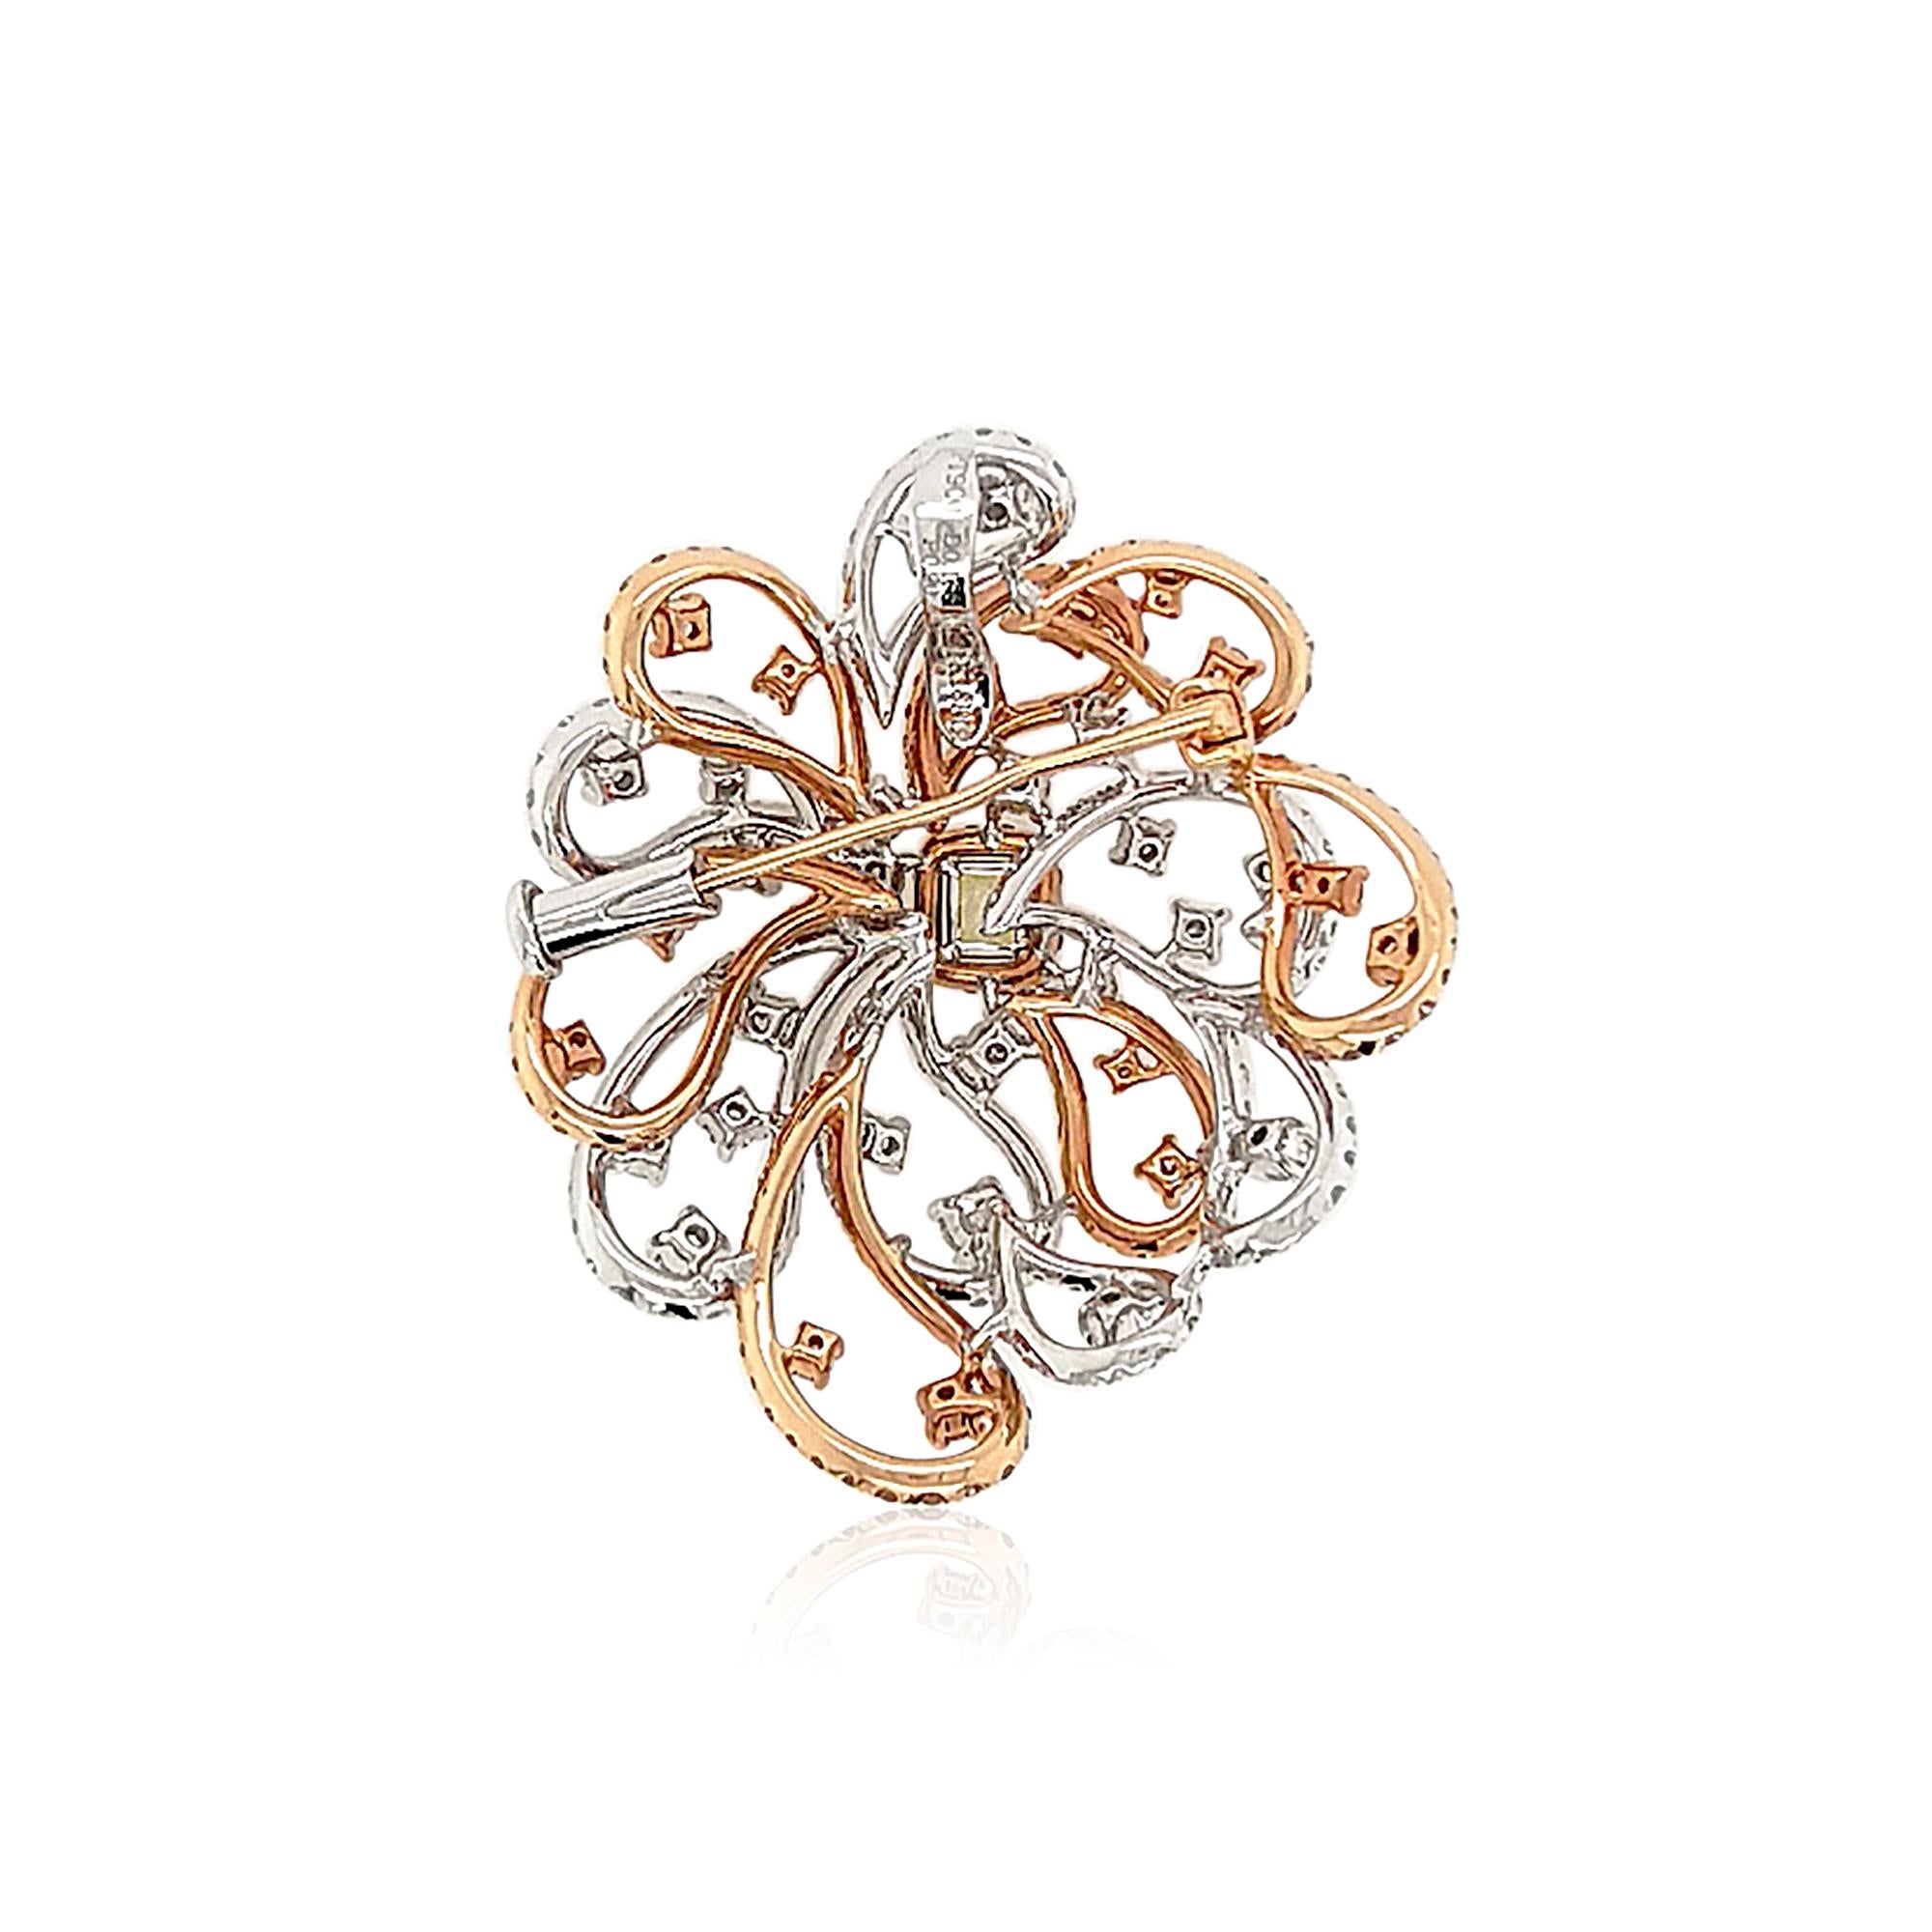 This enchanting two-way pendant/brooch features a spectacular Fancy Vivid Yellow Green Diamond with an elegant arrangement of Argyle Pink Diamonds and White diamonds. Each diamond is completely unique and this design perfectly highlights the allure